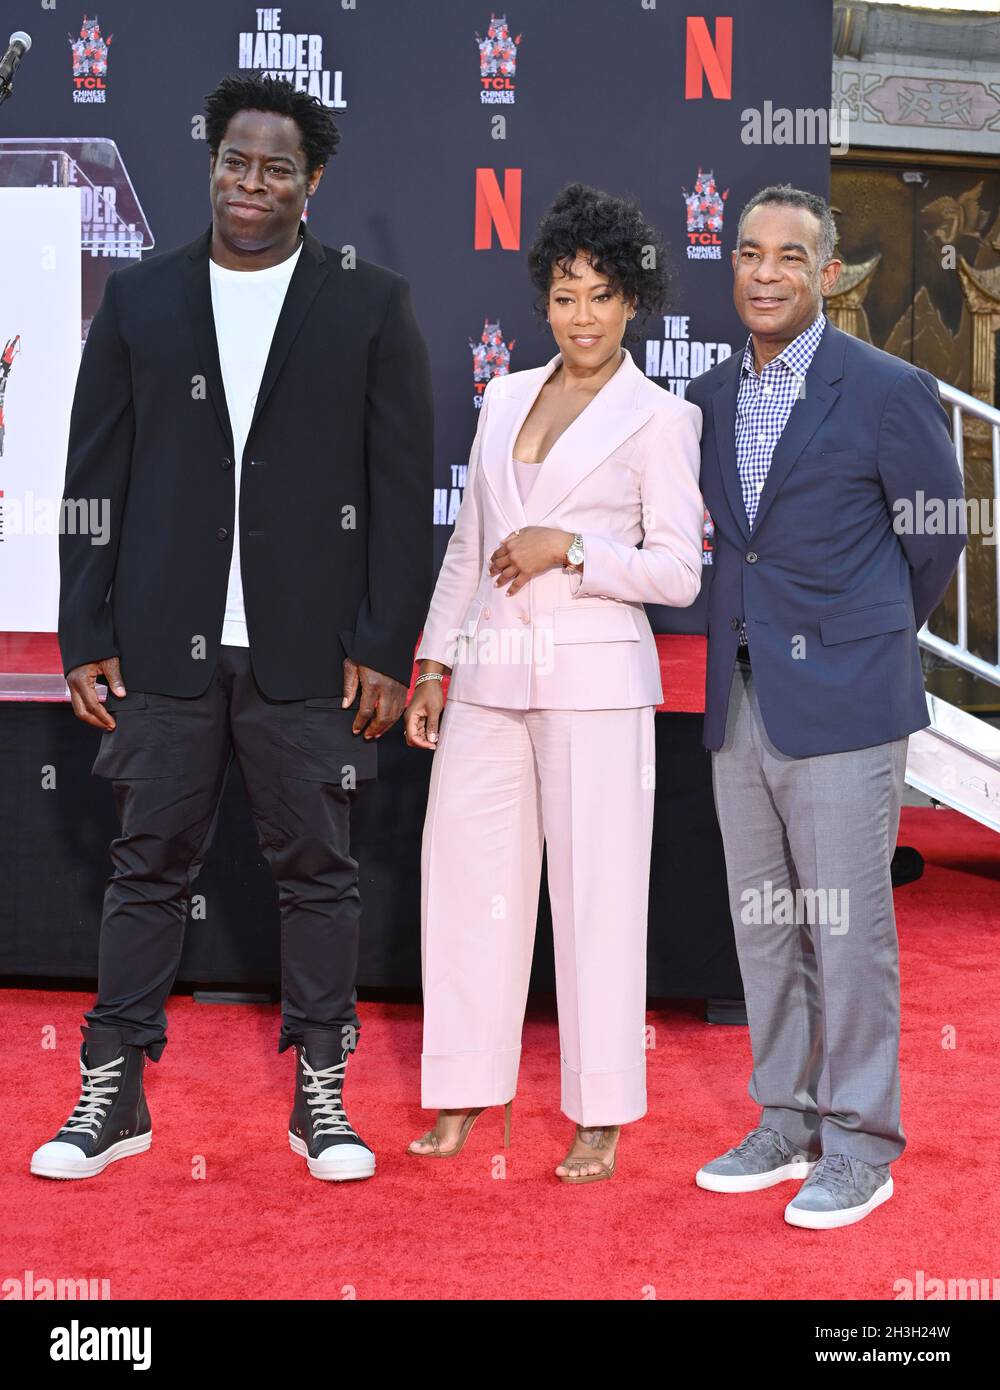 Los Angeles, USA. 28th Oct, 2021. LOS ANGELES, USA. October 28, 2021: Jeymes Samuel, Regina King & James Lassiter at the hand & footprint ceremony honoring actress Regina King, at the TCL Chinese Theatre, Hollywood. Picture Credit: Paul Smith/Alamy Live News Stock Photo